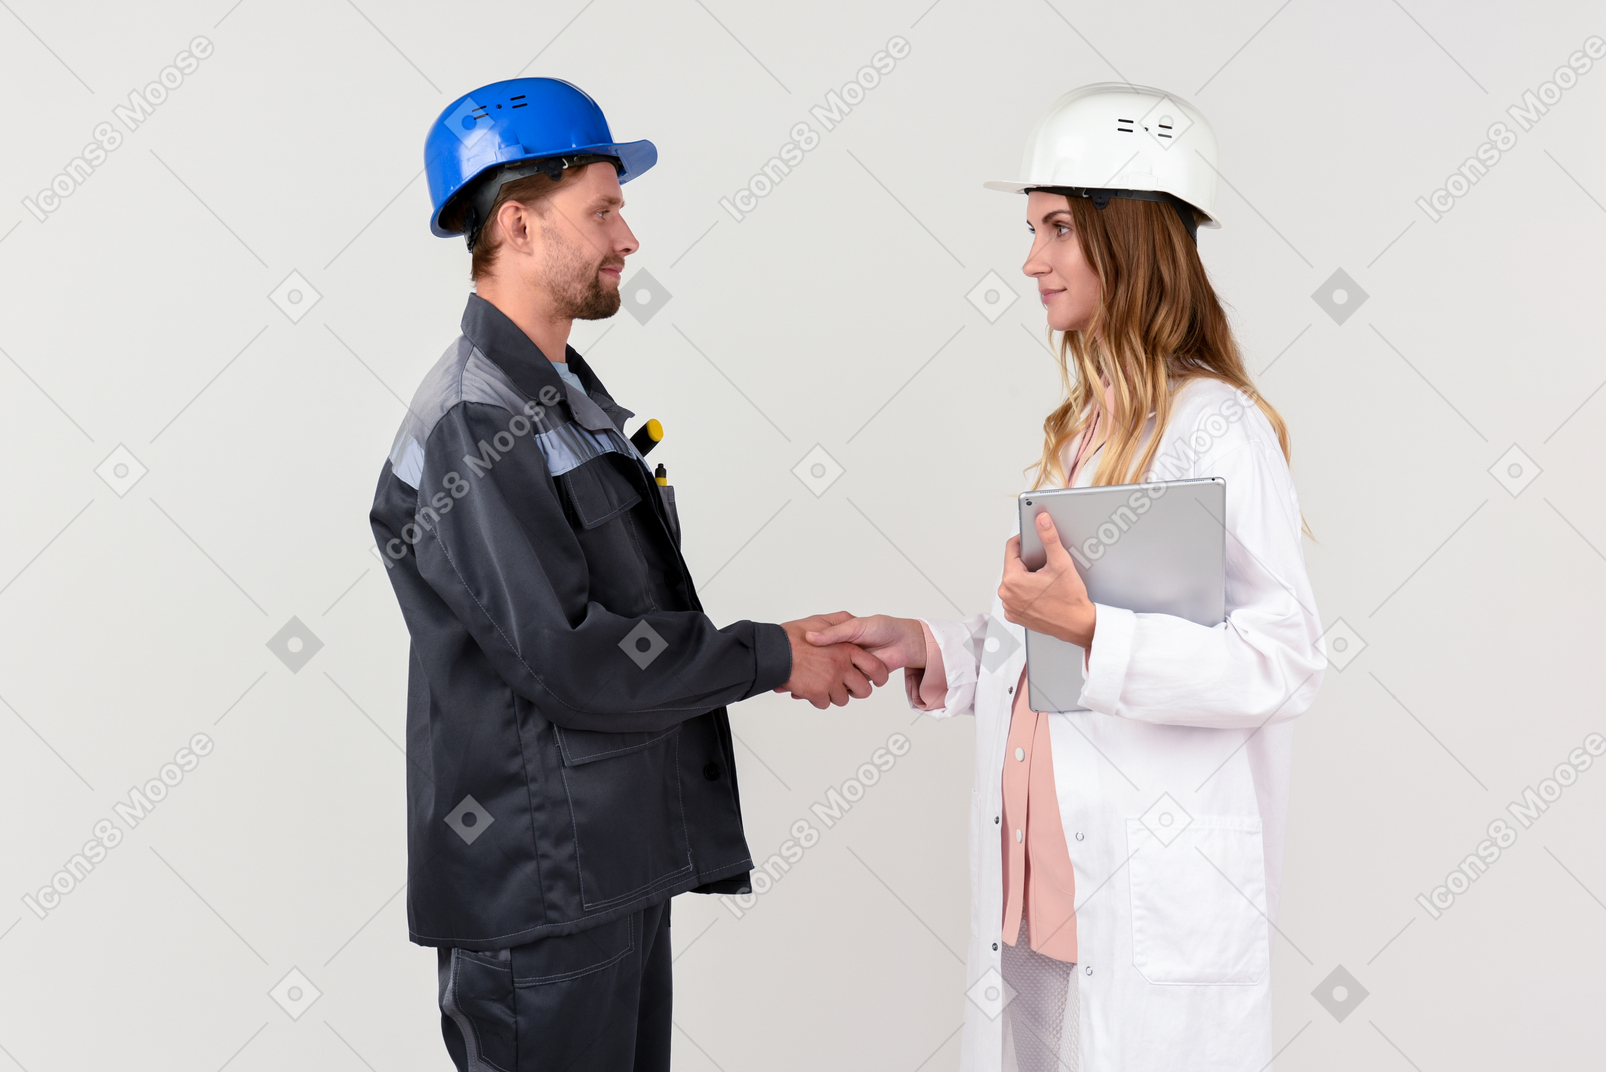 Engineers shaking hands at work